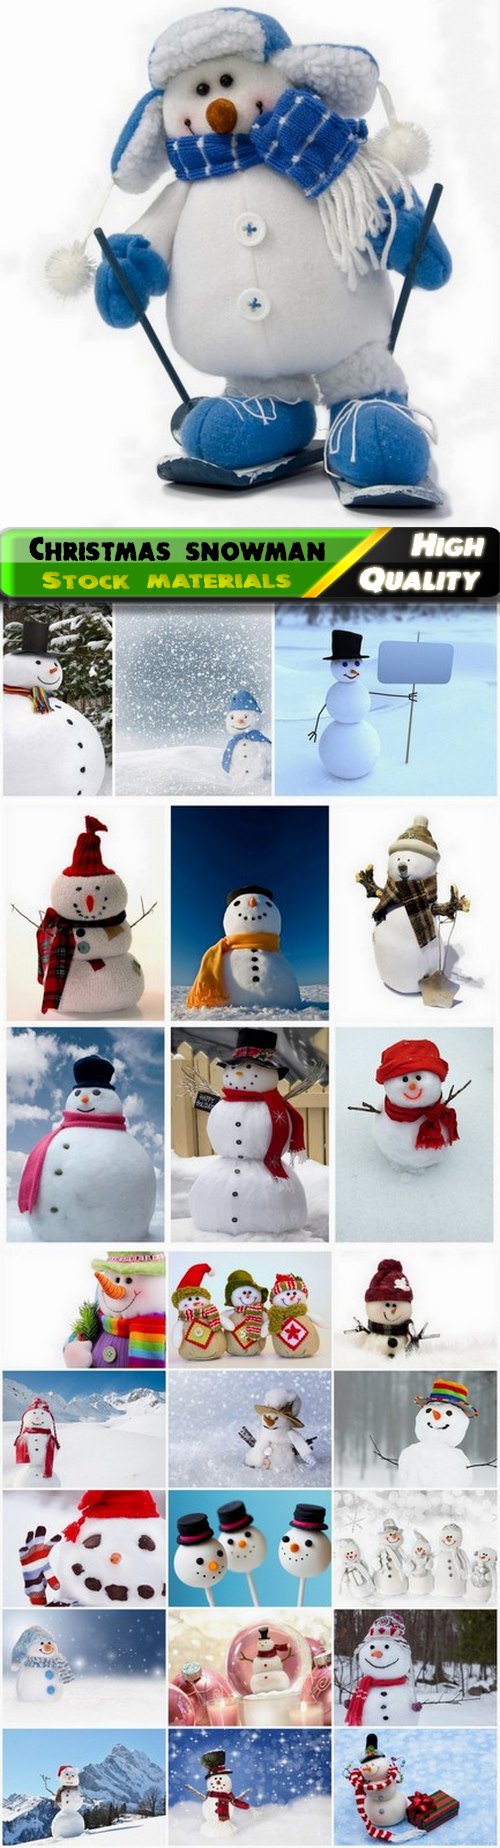 Funny holiday Christmas snowman with smile and in hat - 25 HQ Jpg